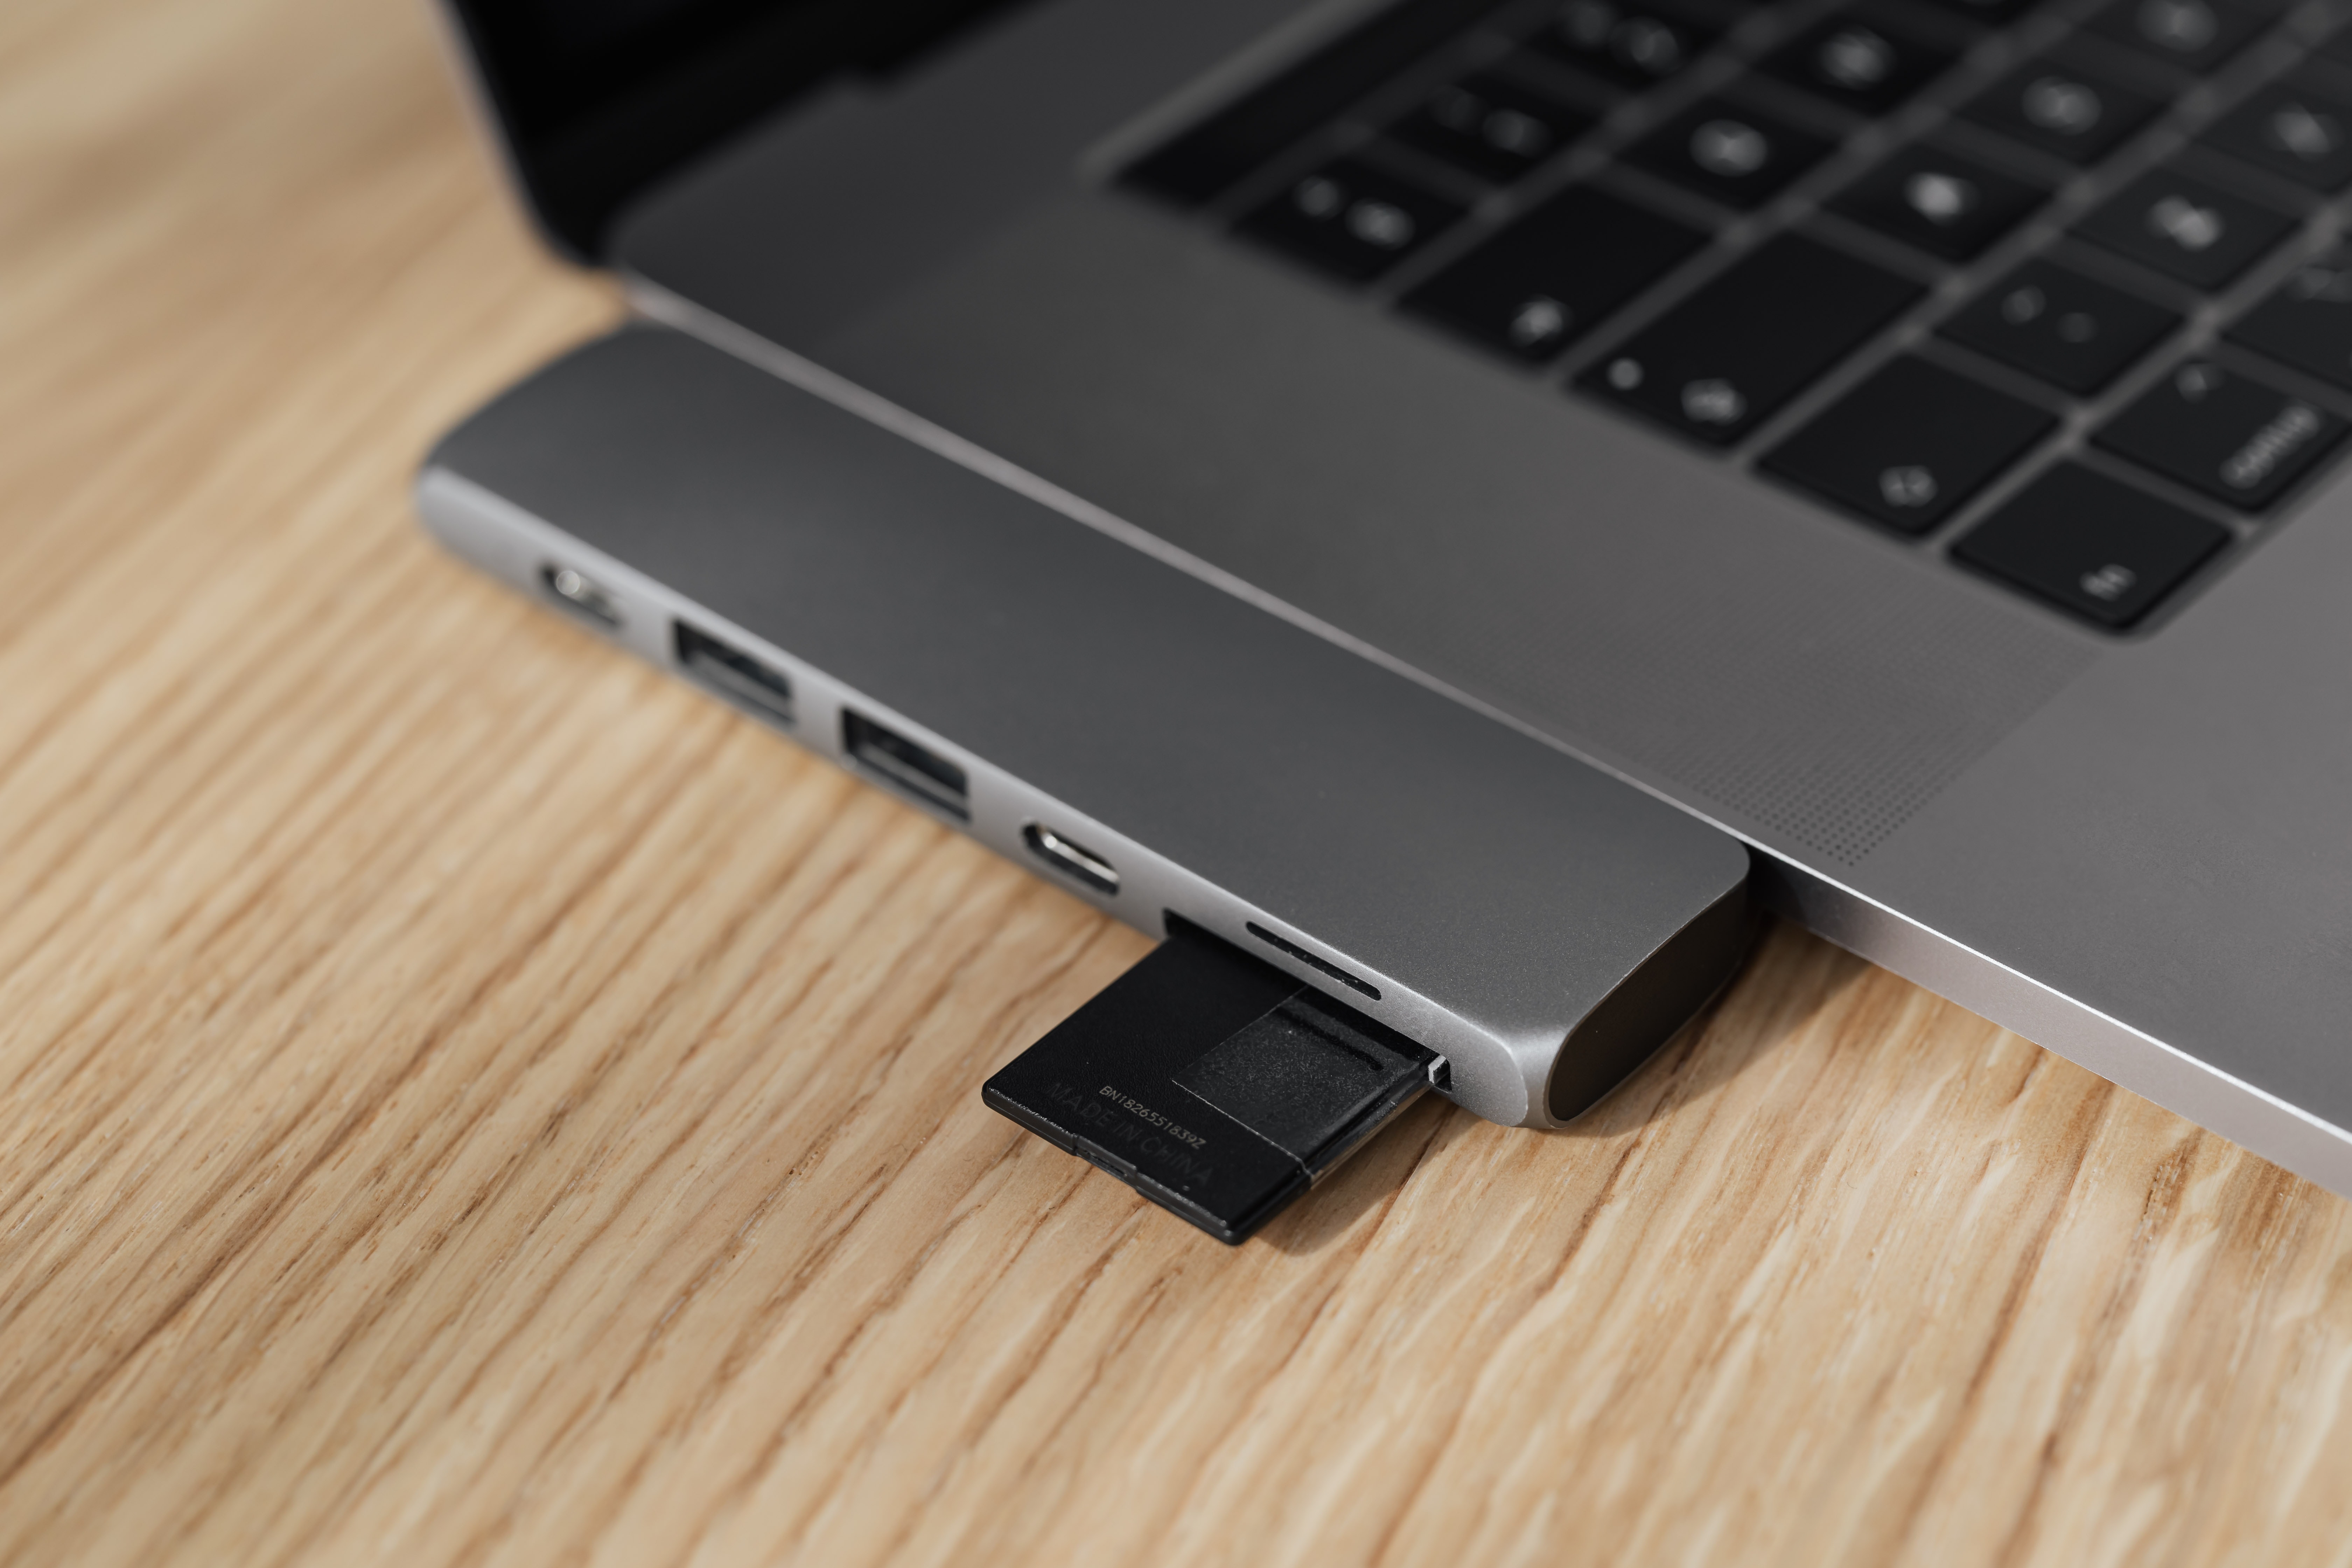 A photographer’s laptop with an USB memory card reader and an SD card.